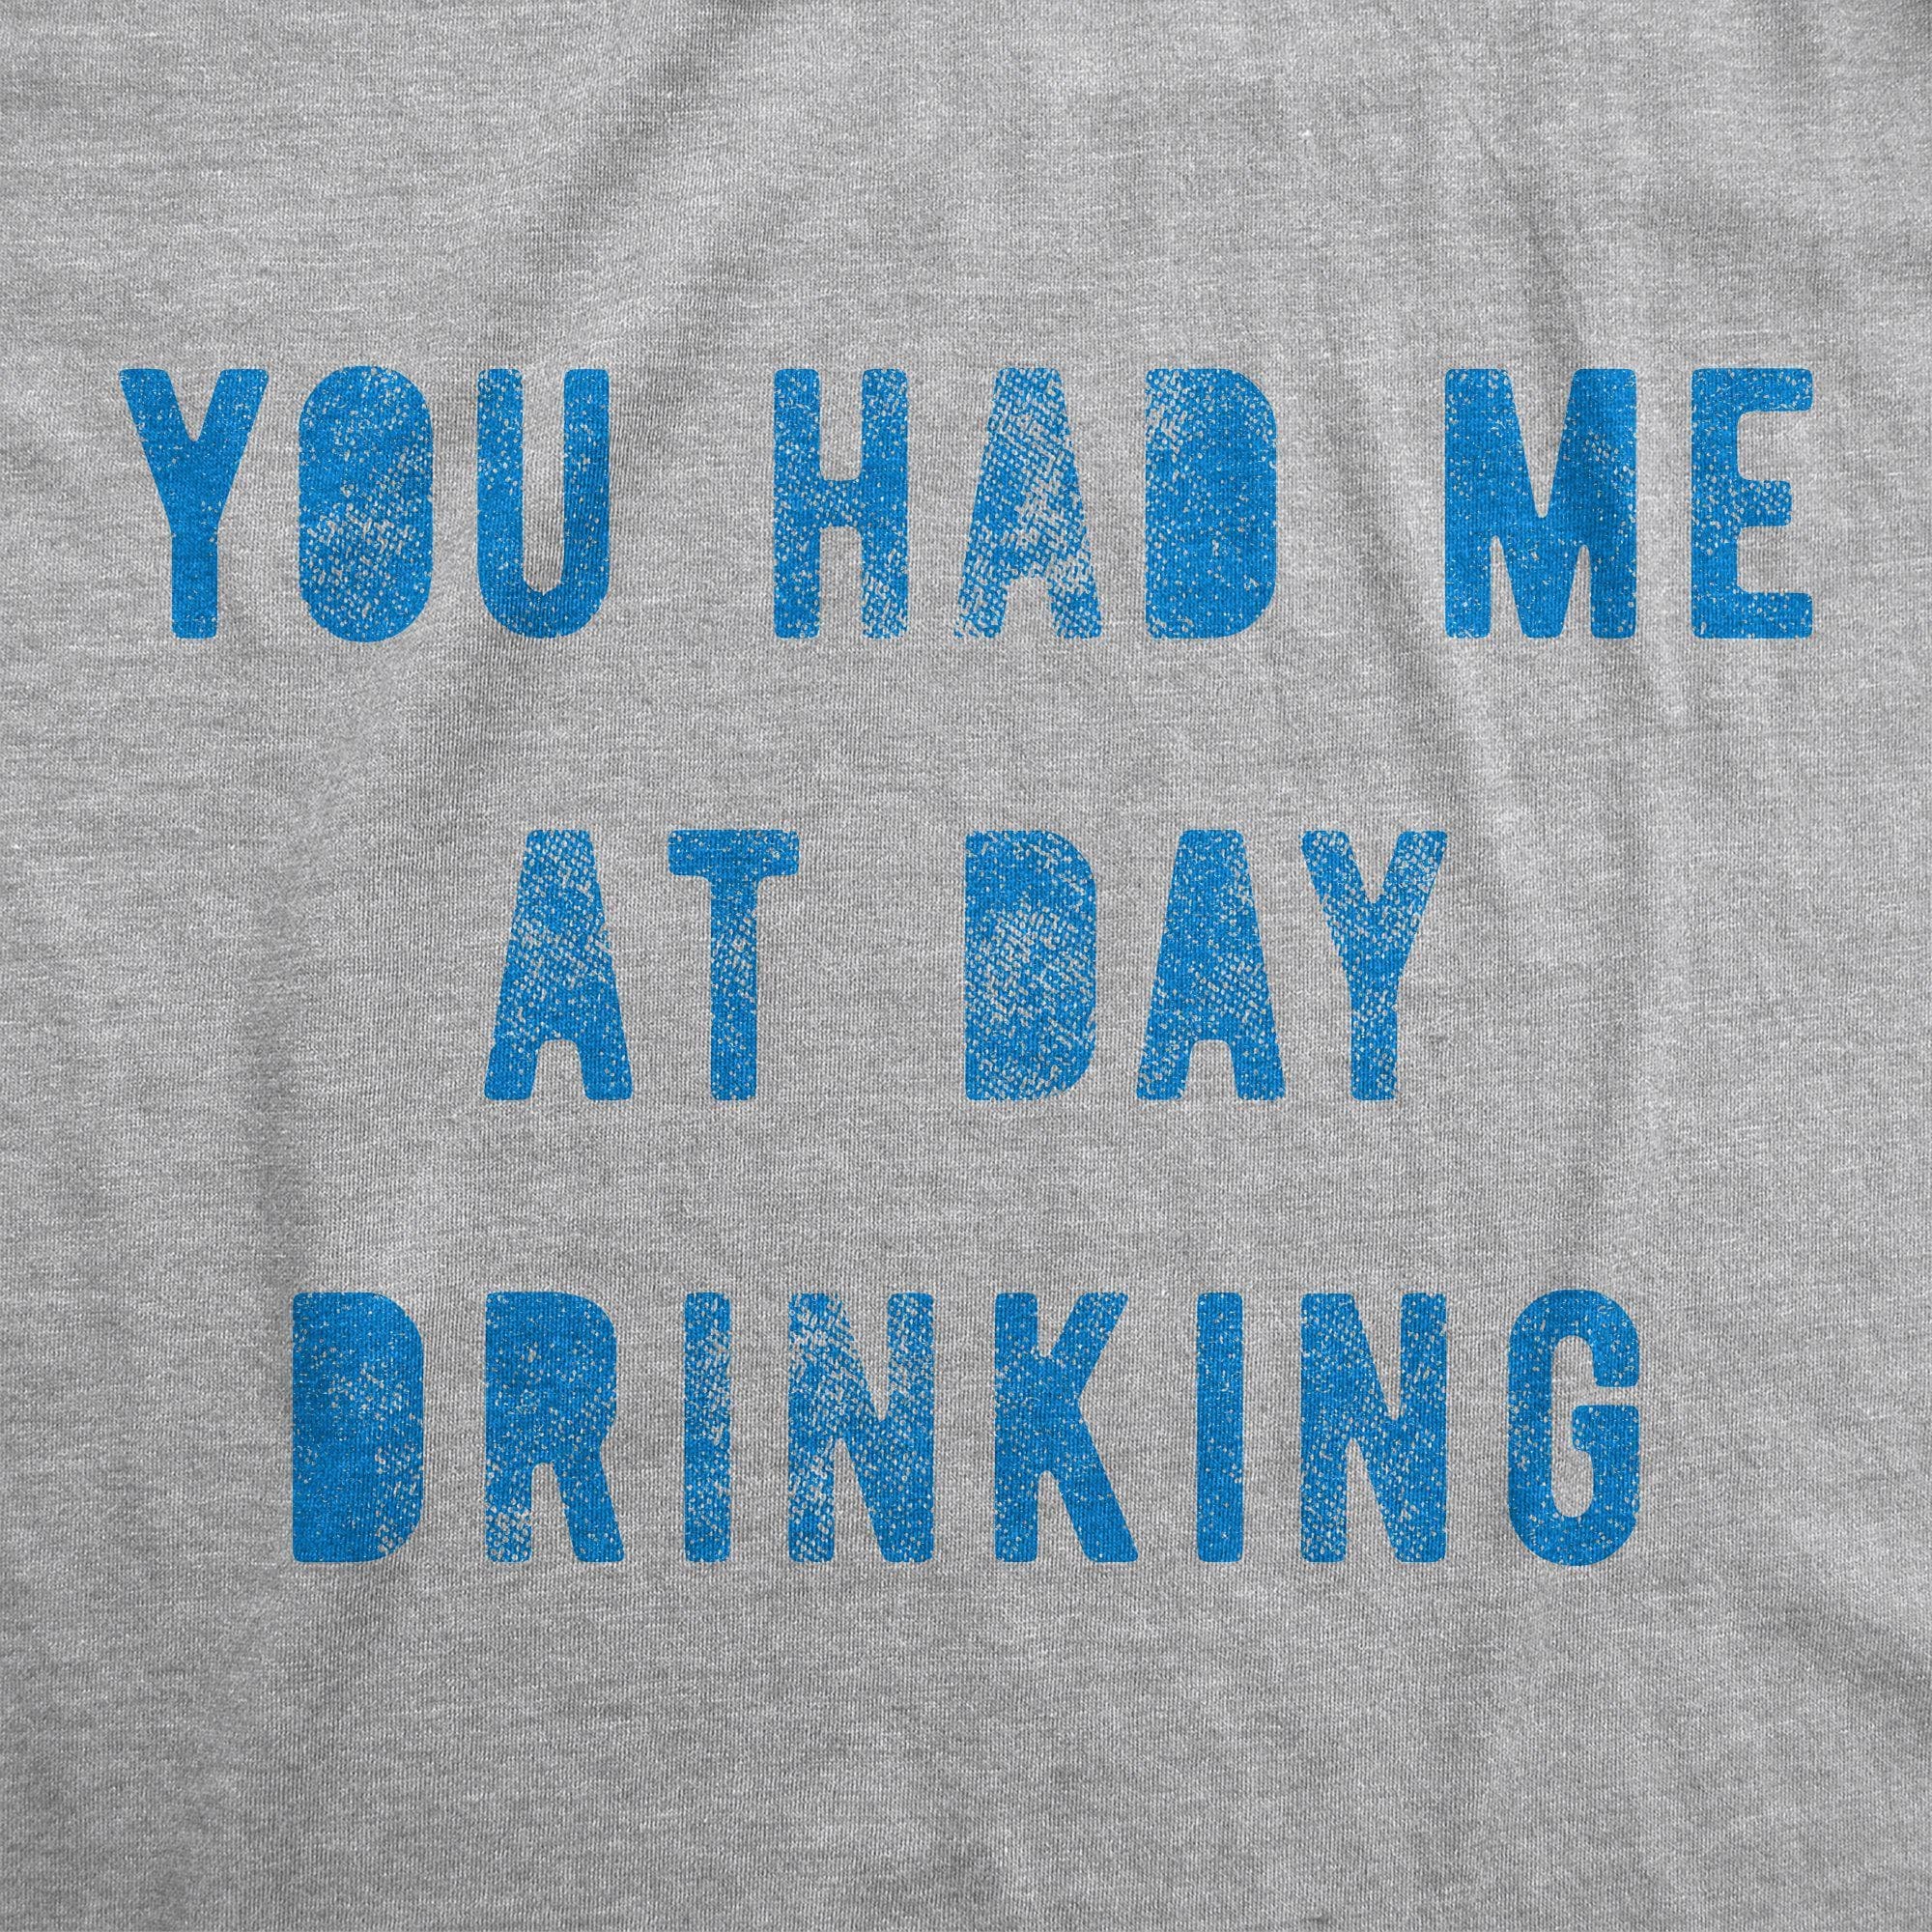 You Had Me At Day Drinking Women's Tank Top - Crazy Dog T-Shirts